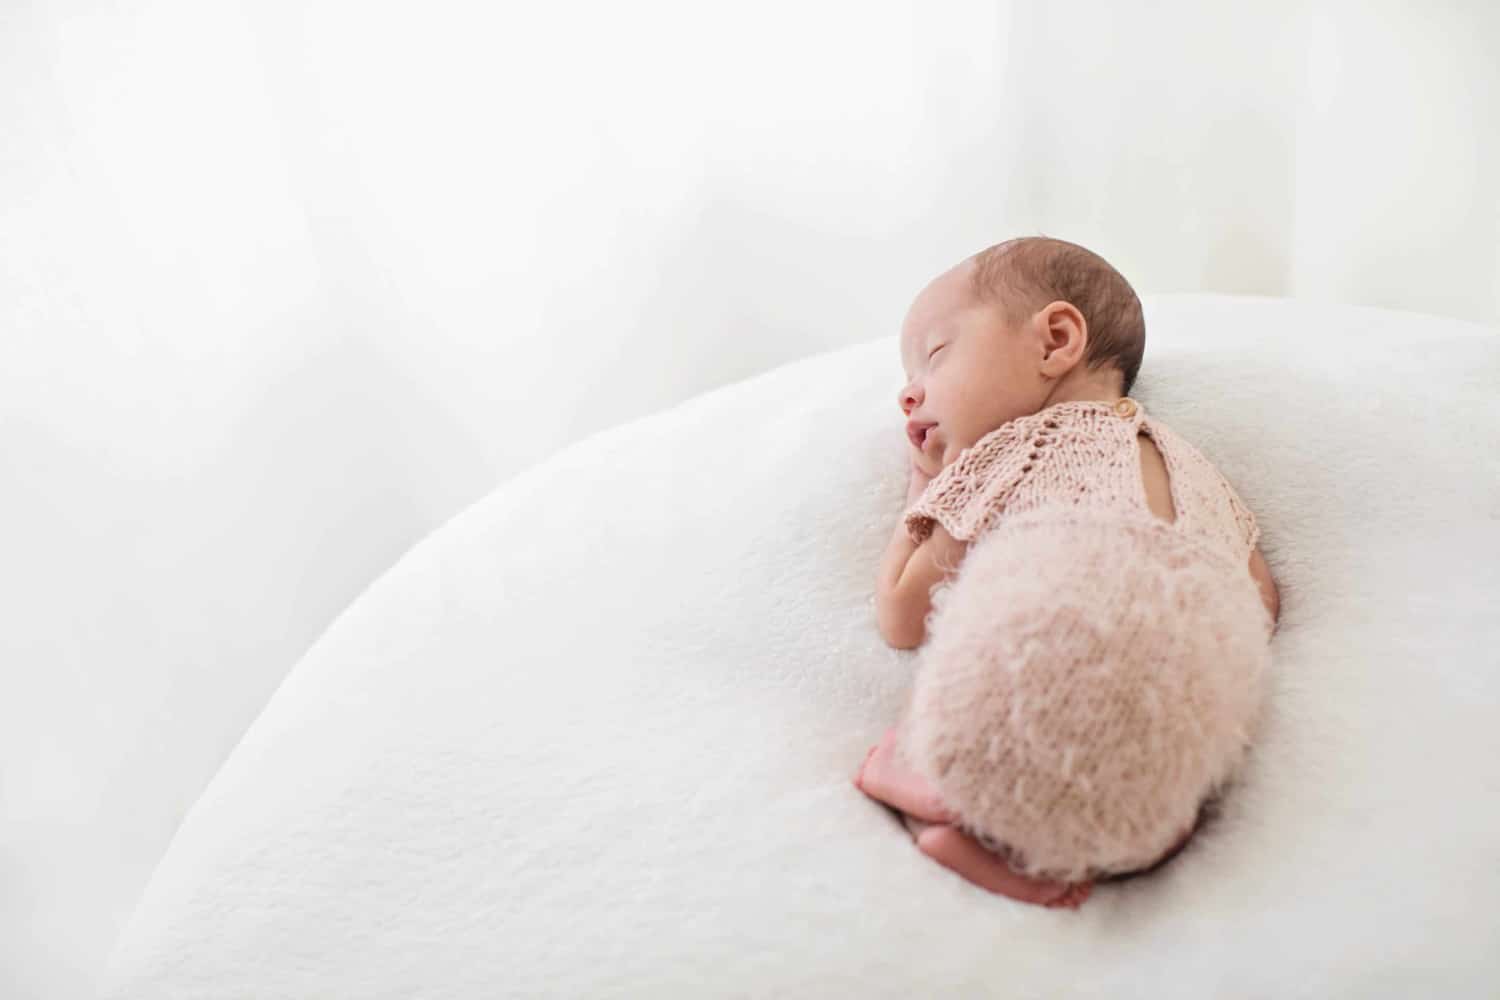 Newborn Photography Tips: Props, Poses, & More